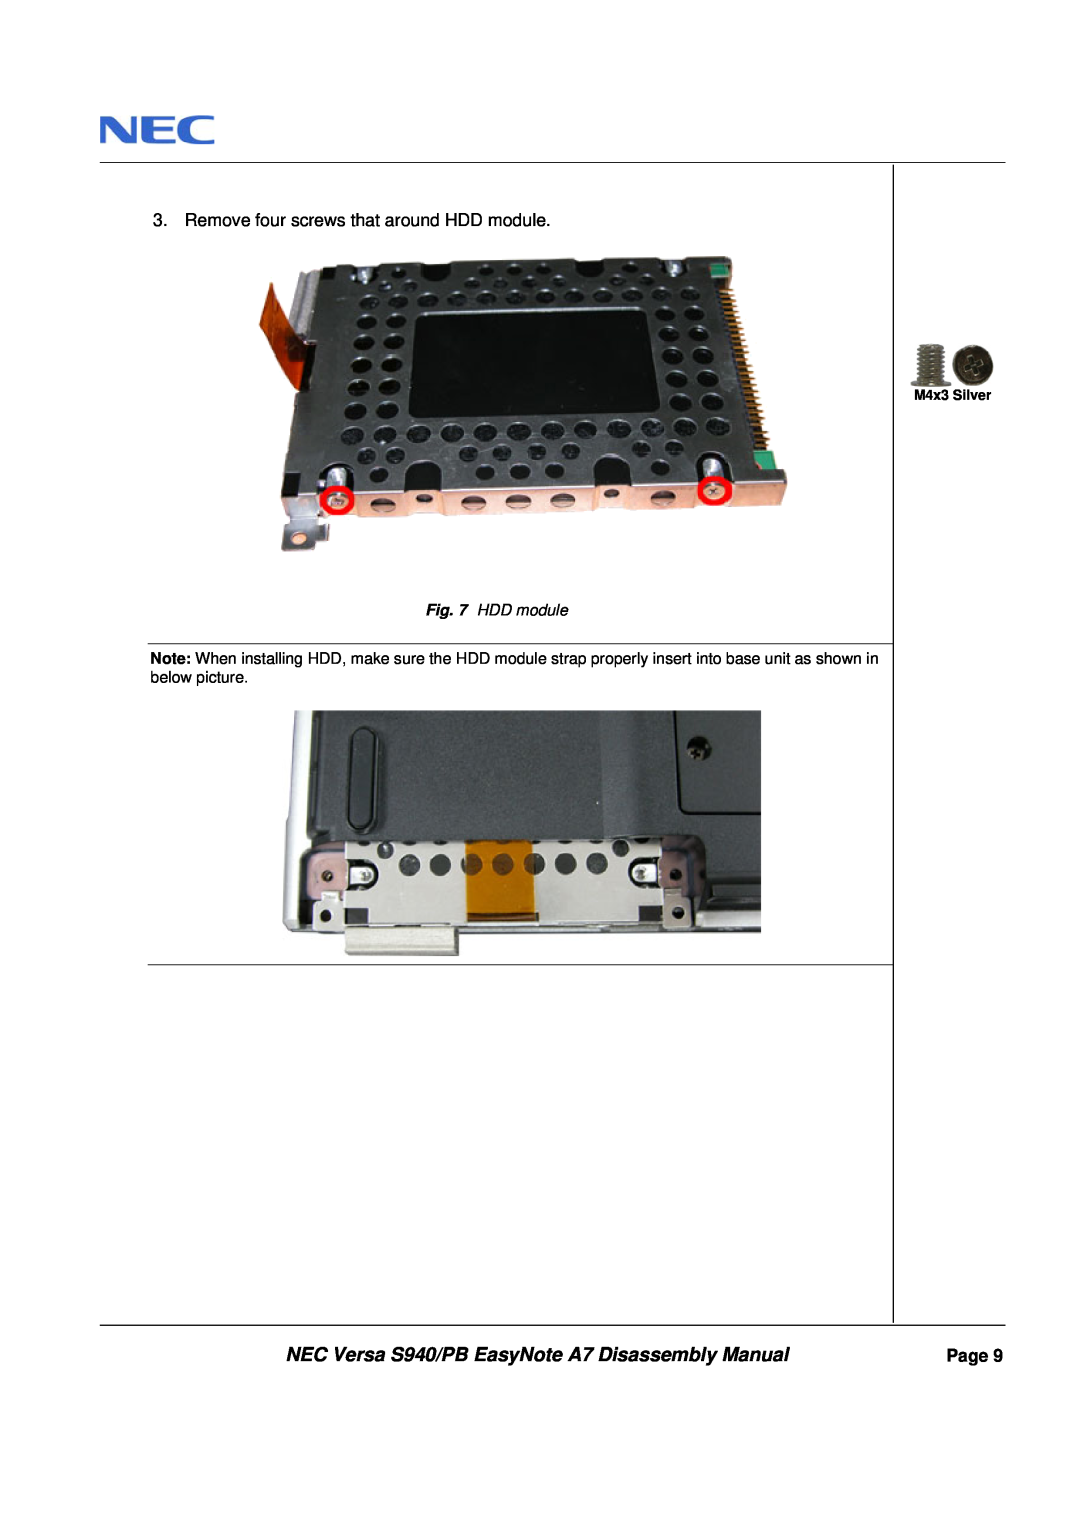 Packard Bell manual NEC Versa S940/PB EasyNote A7 Disassembly Manual, Remove four screws that around HDD module, Page 